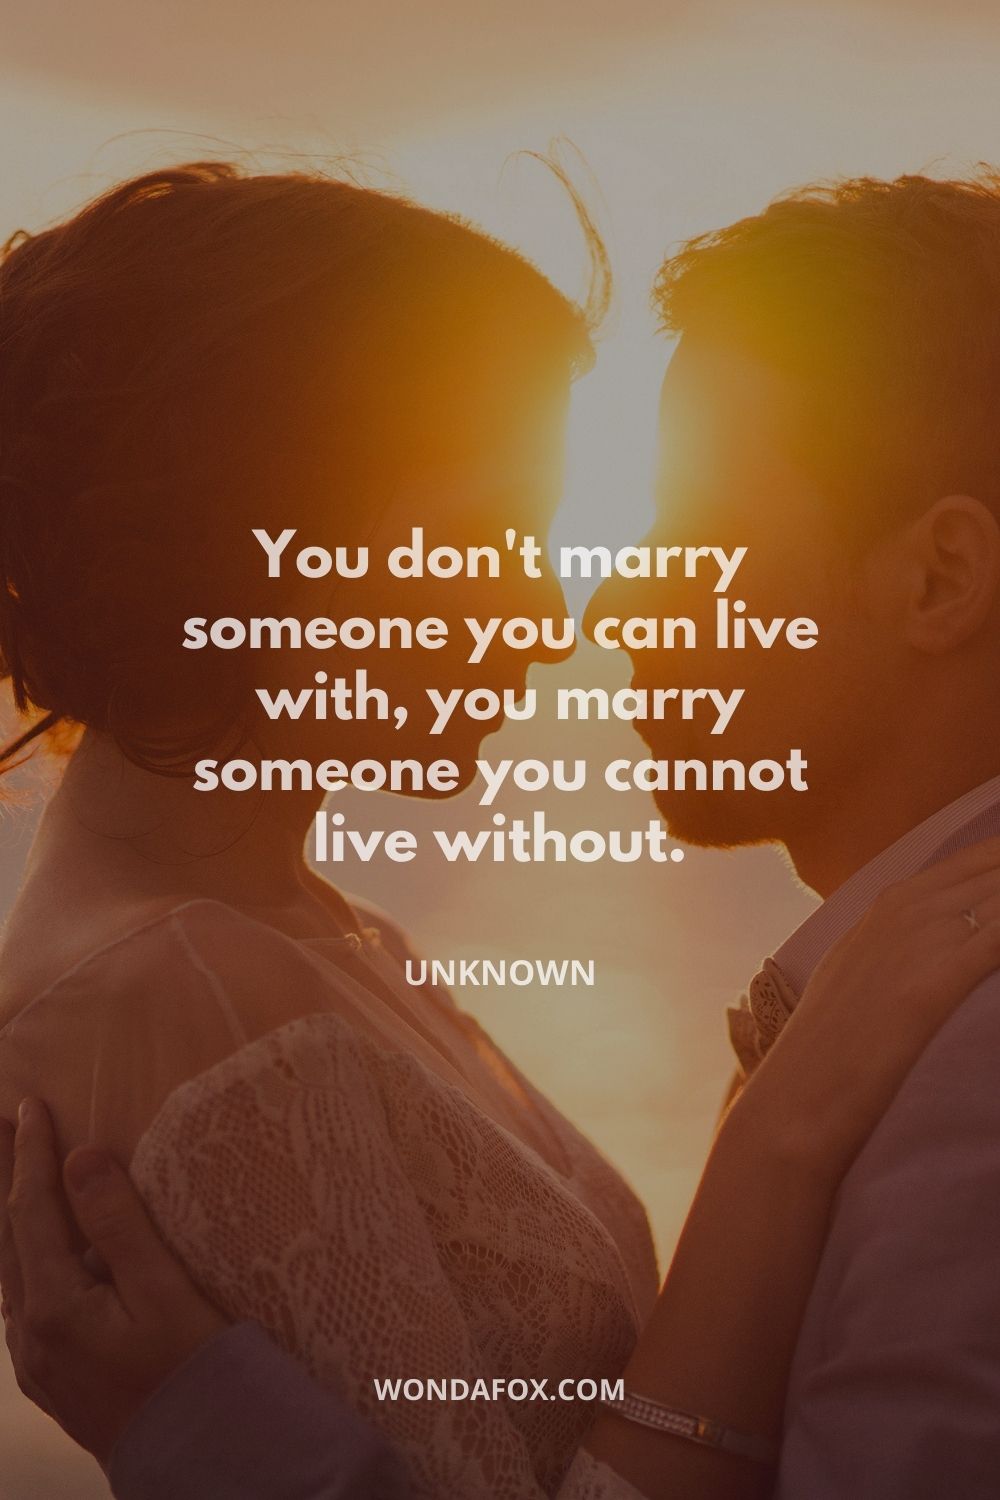 You don't marry someone you can live with, you marry someone you cannot live without.